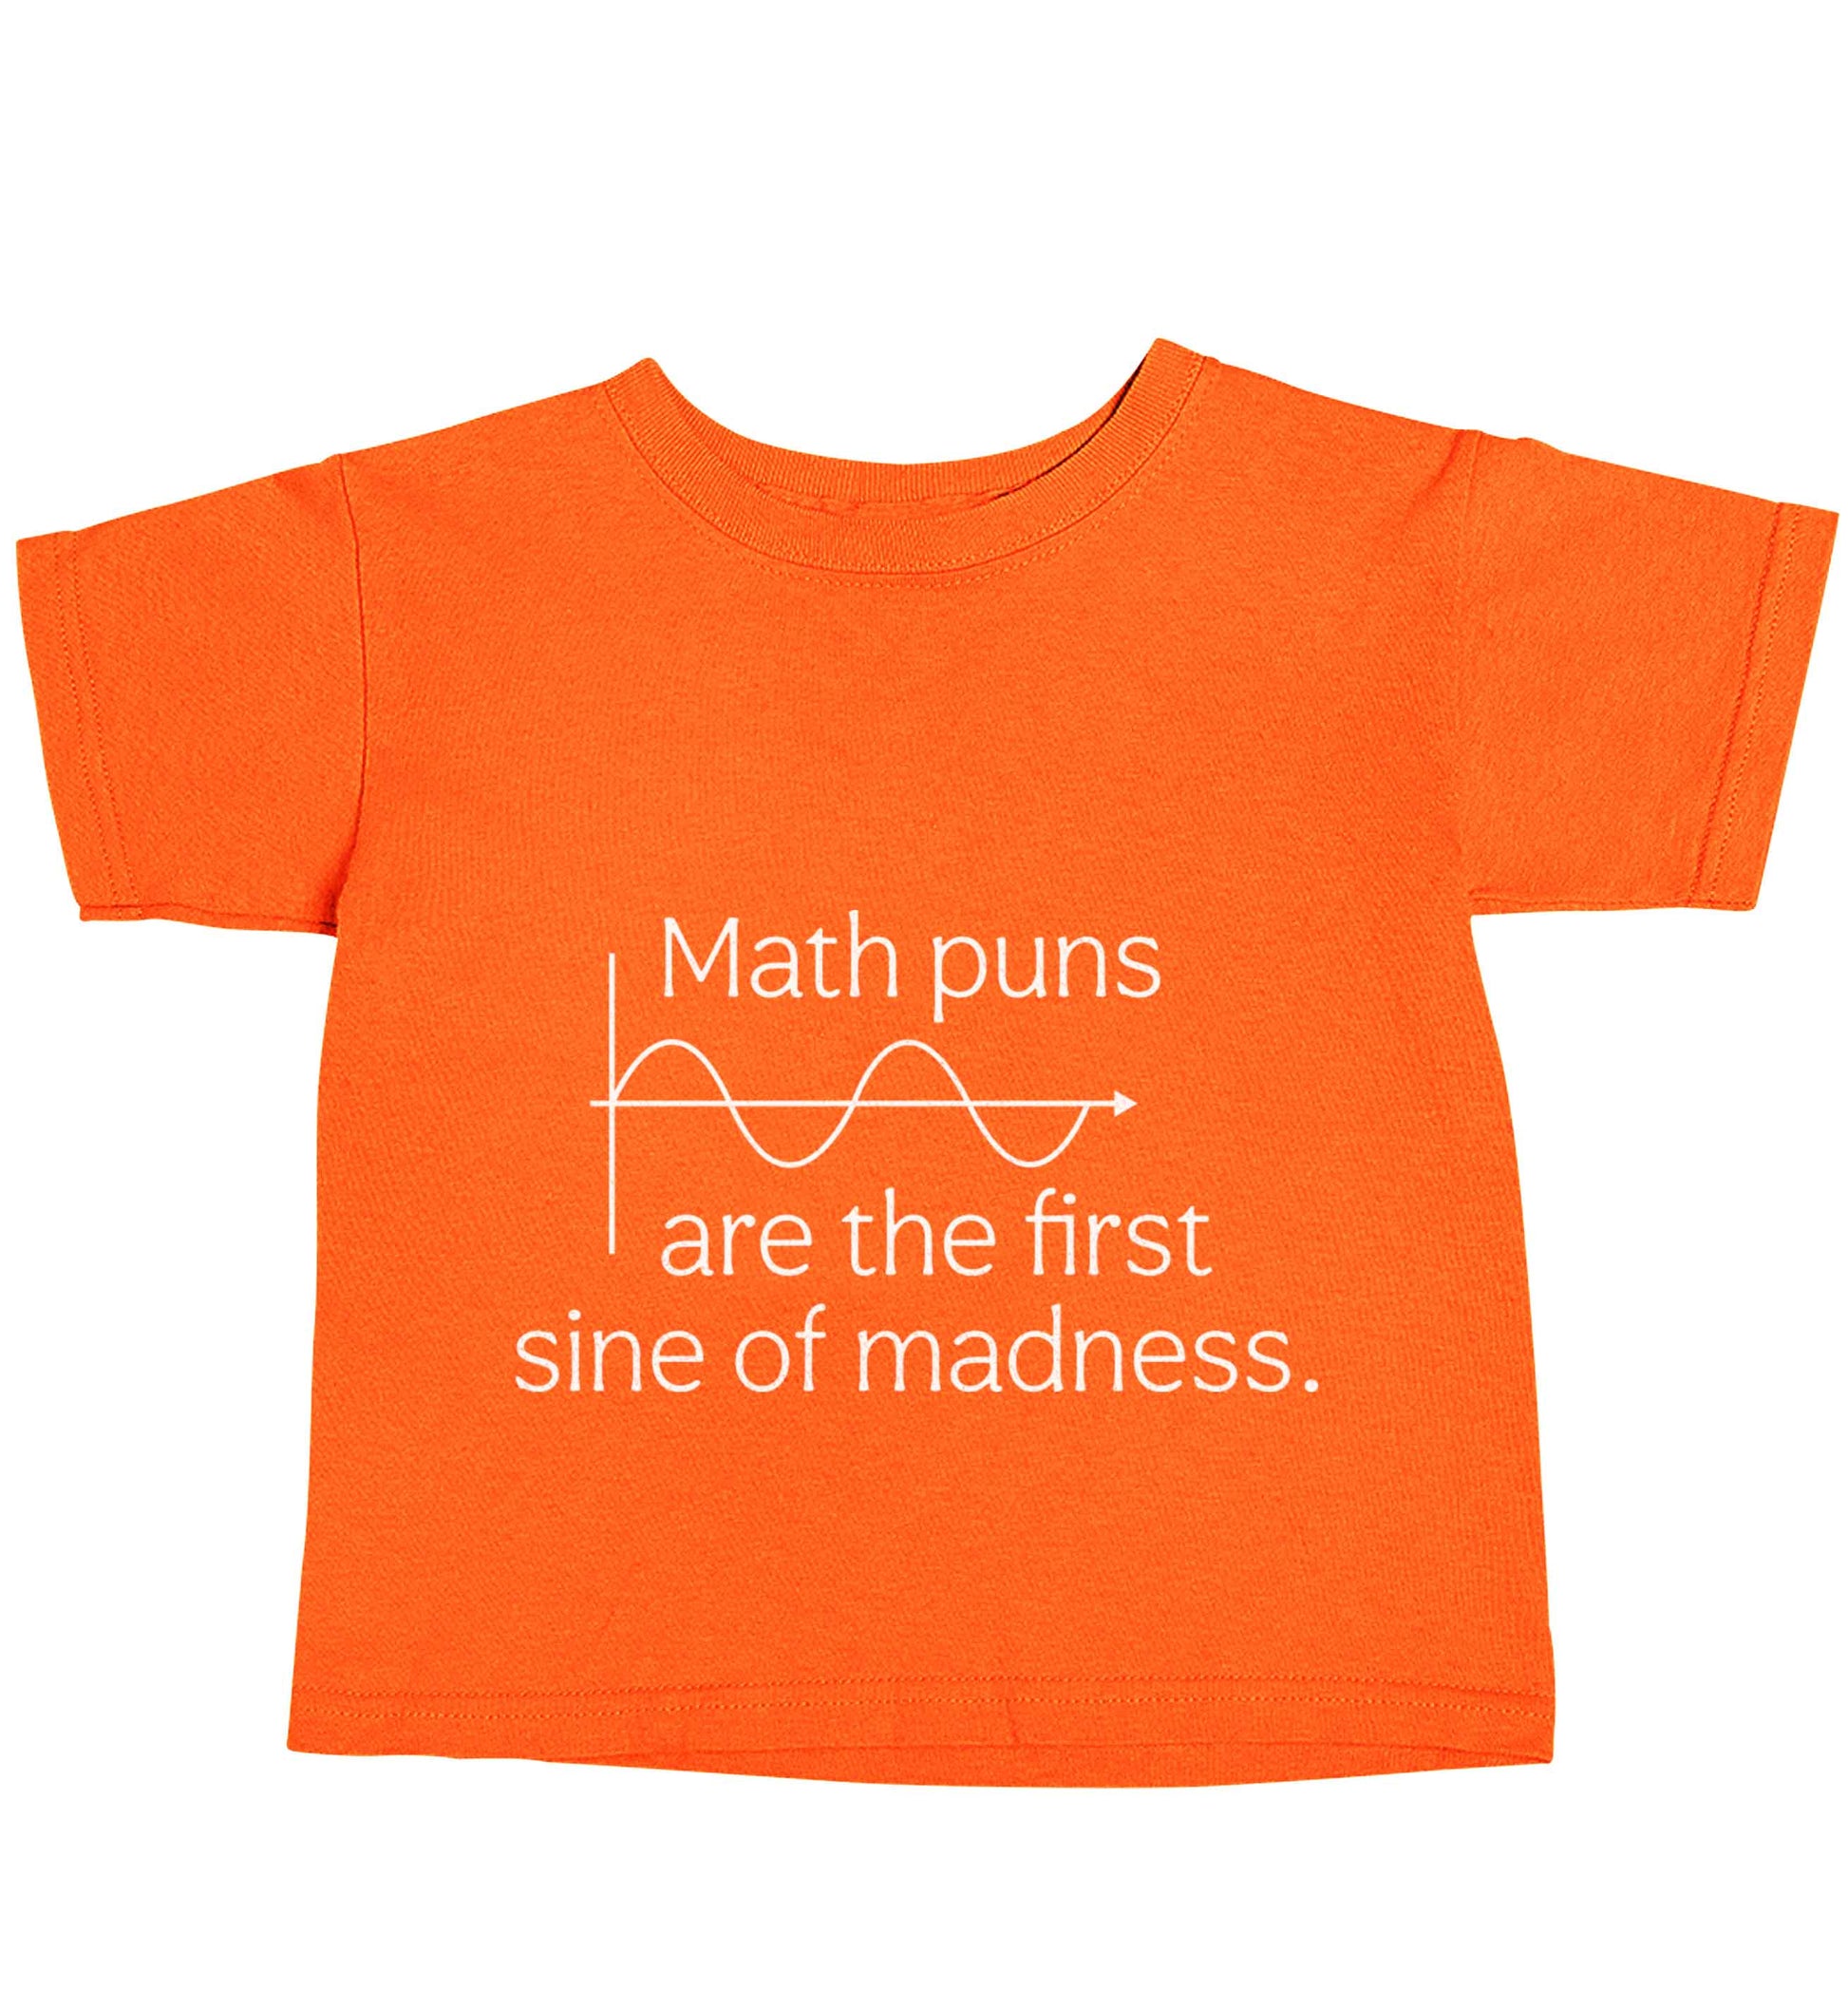 Math puns are the first sine of madness orange baby toddler Tshirt 2 Years